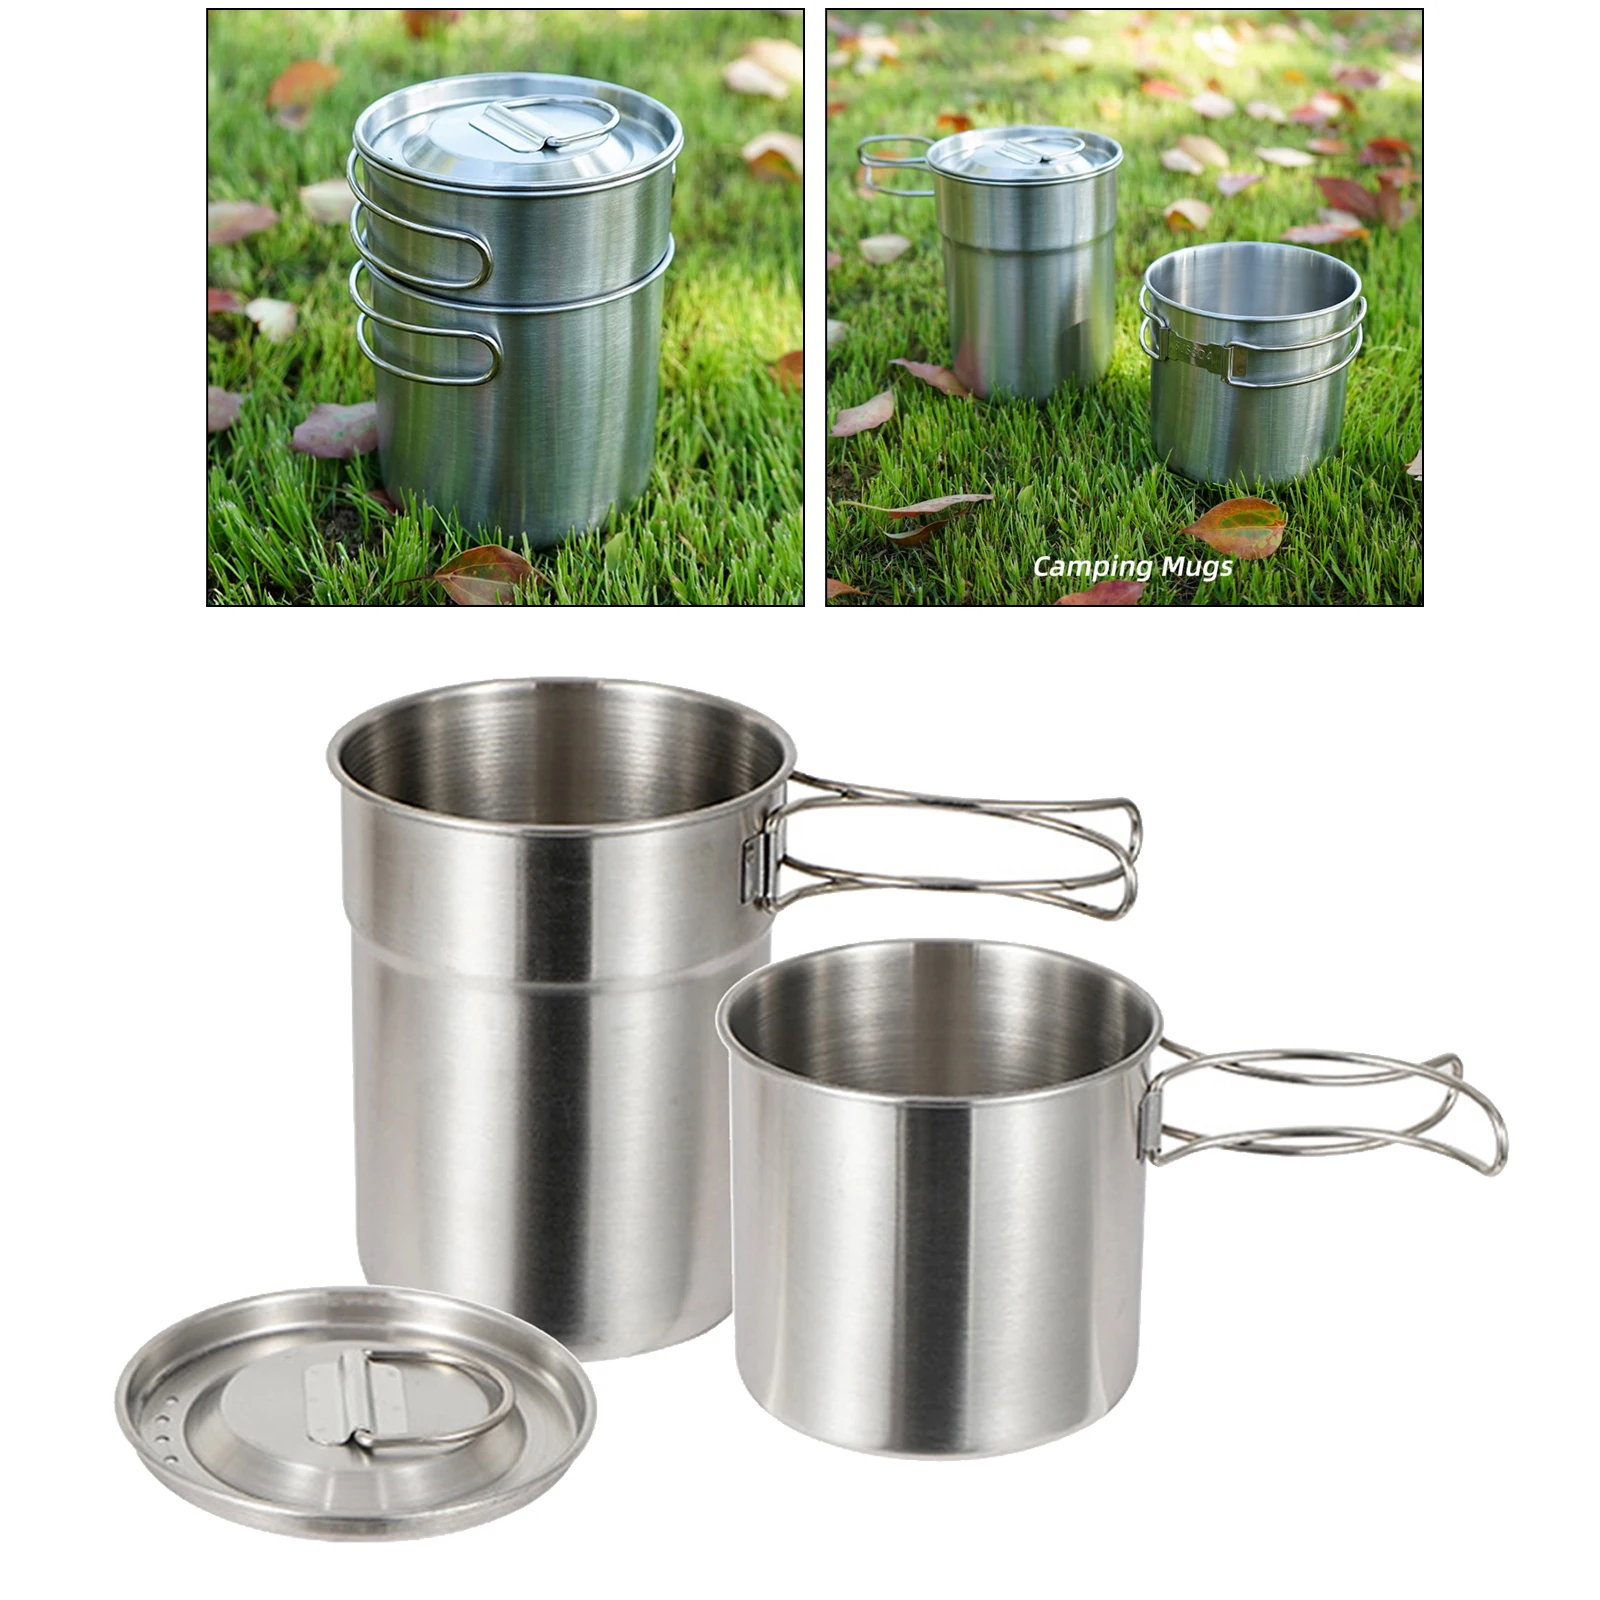 Portable 2x Camping Cup Kit Drinking Soup Cookware Cooking Bowl Camp Outdoor